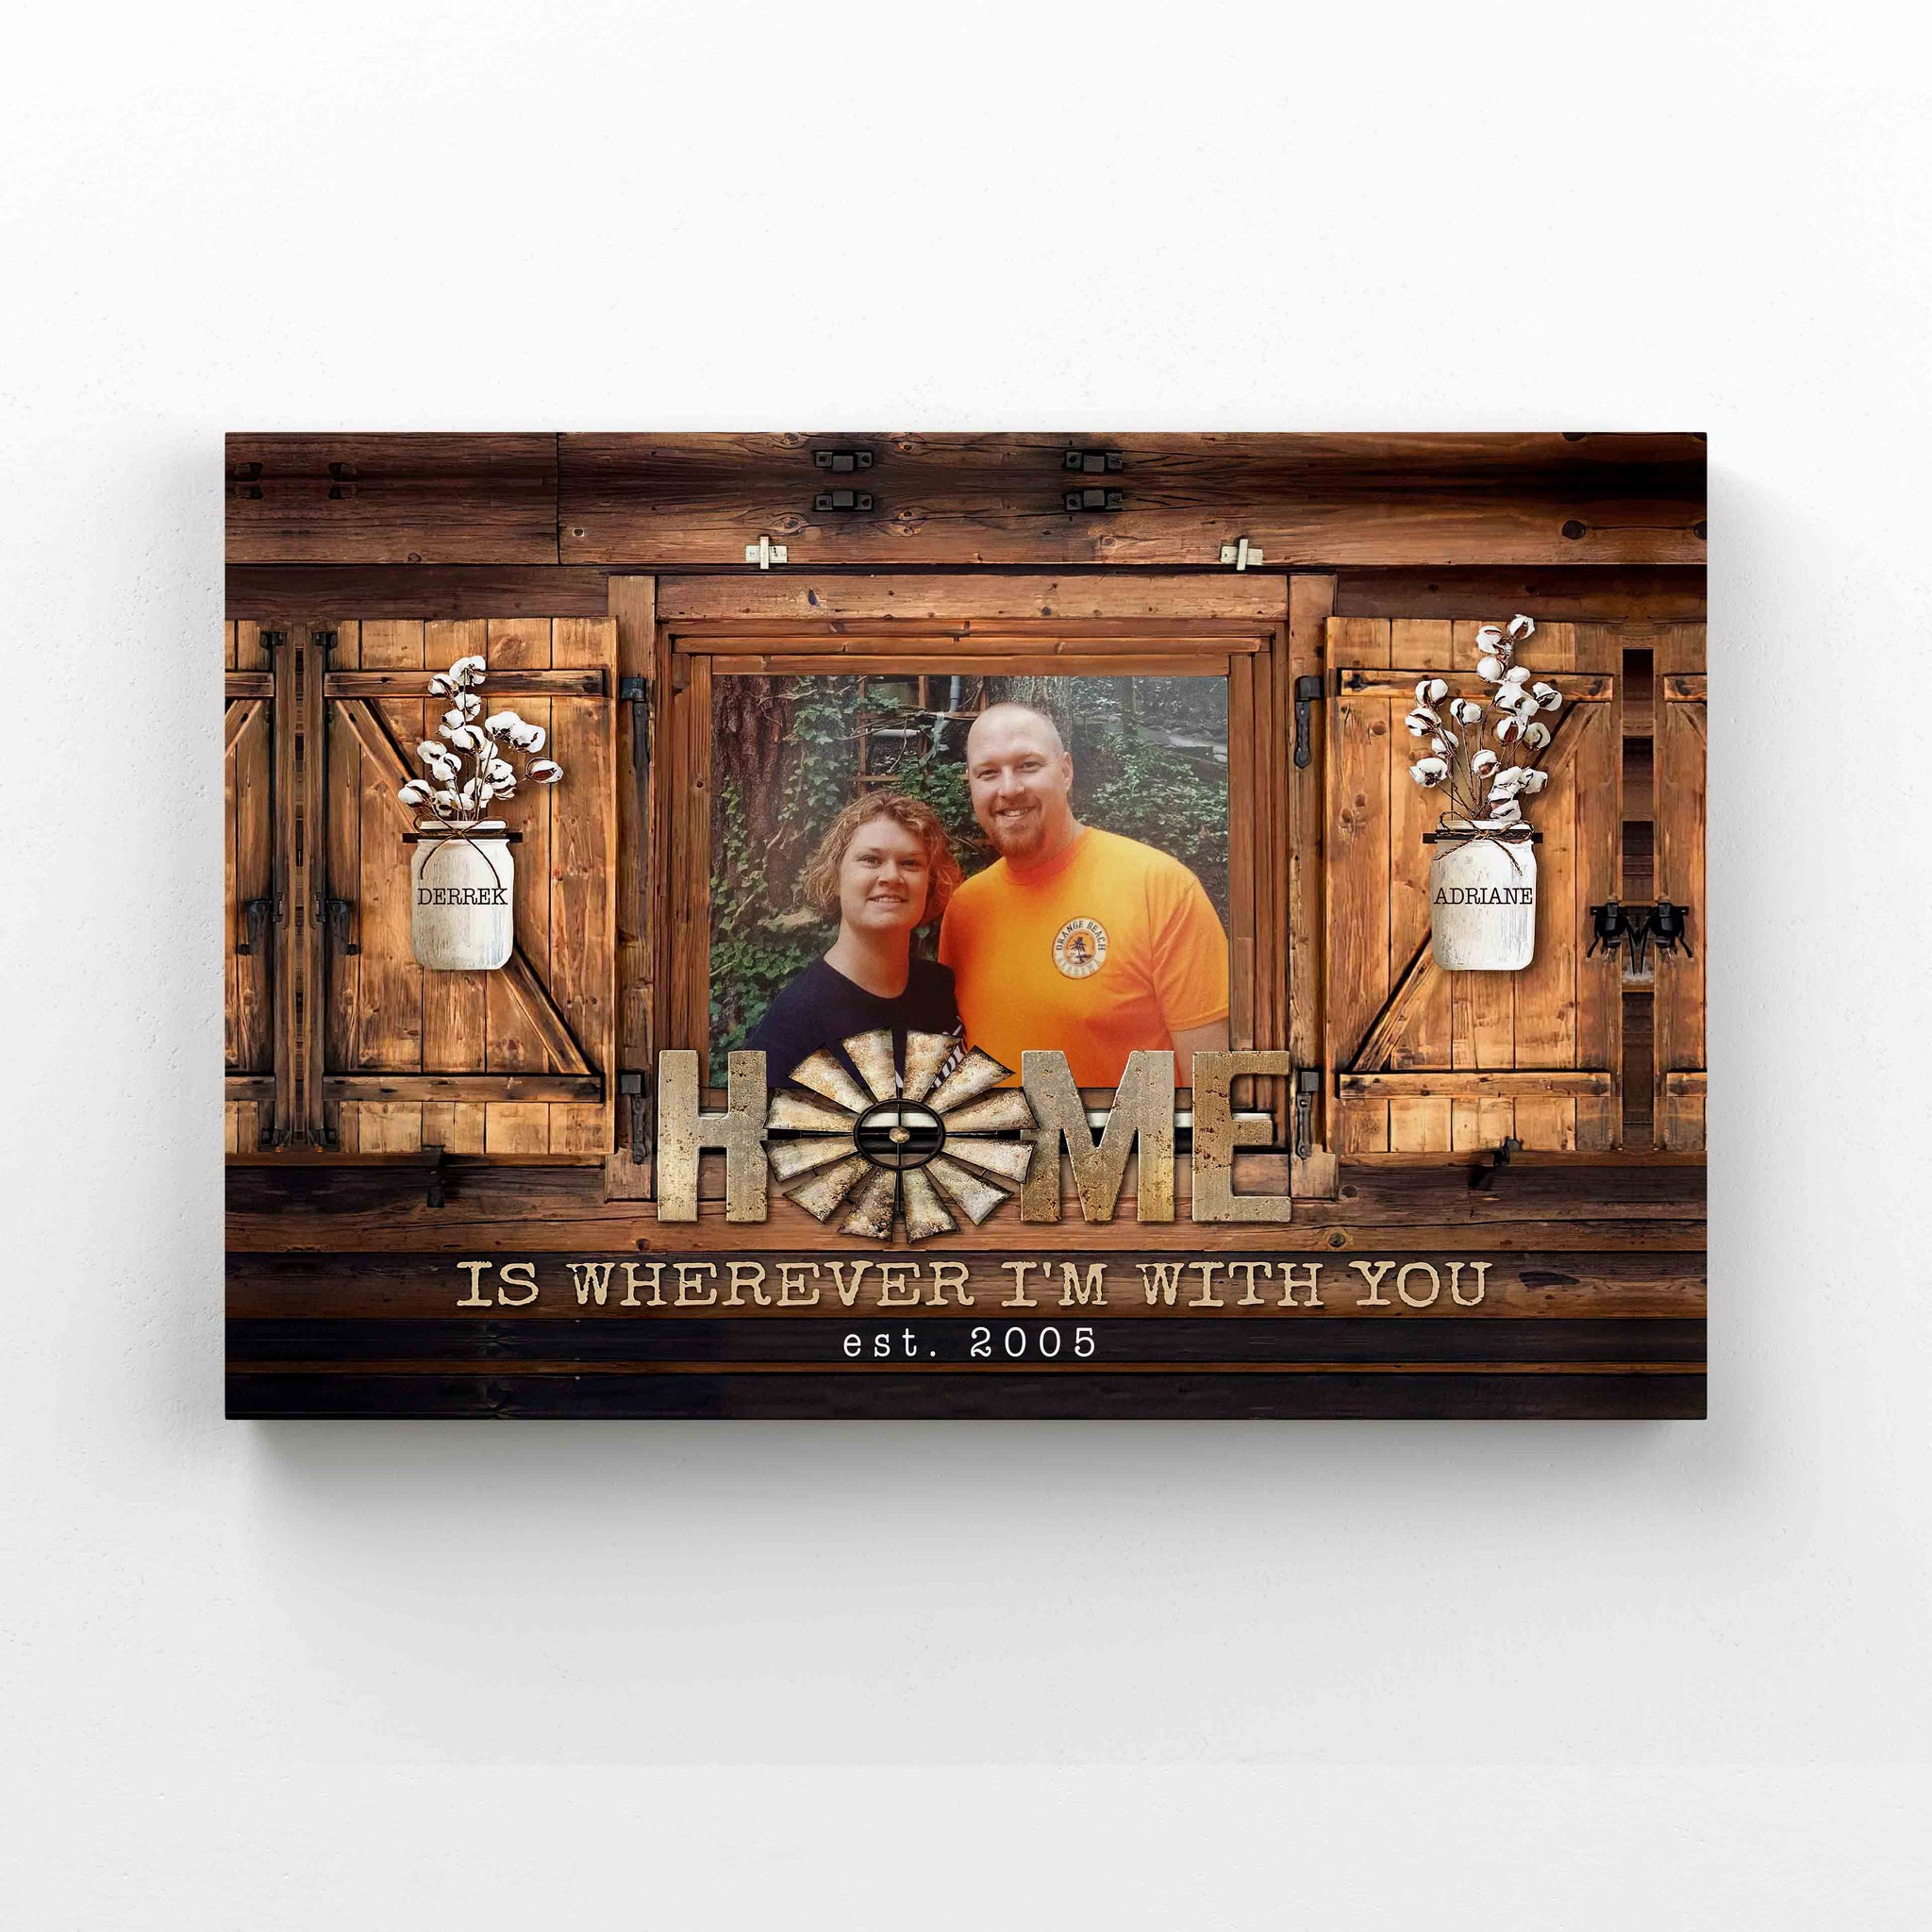 Personalized Image Canvas, Home Is Wherever I'm With You Canvas, Family Canvas